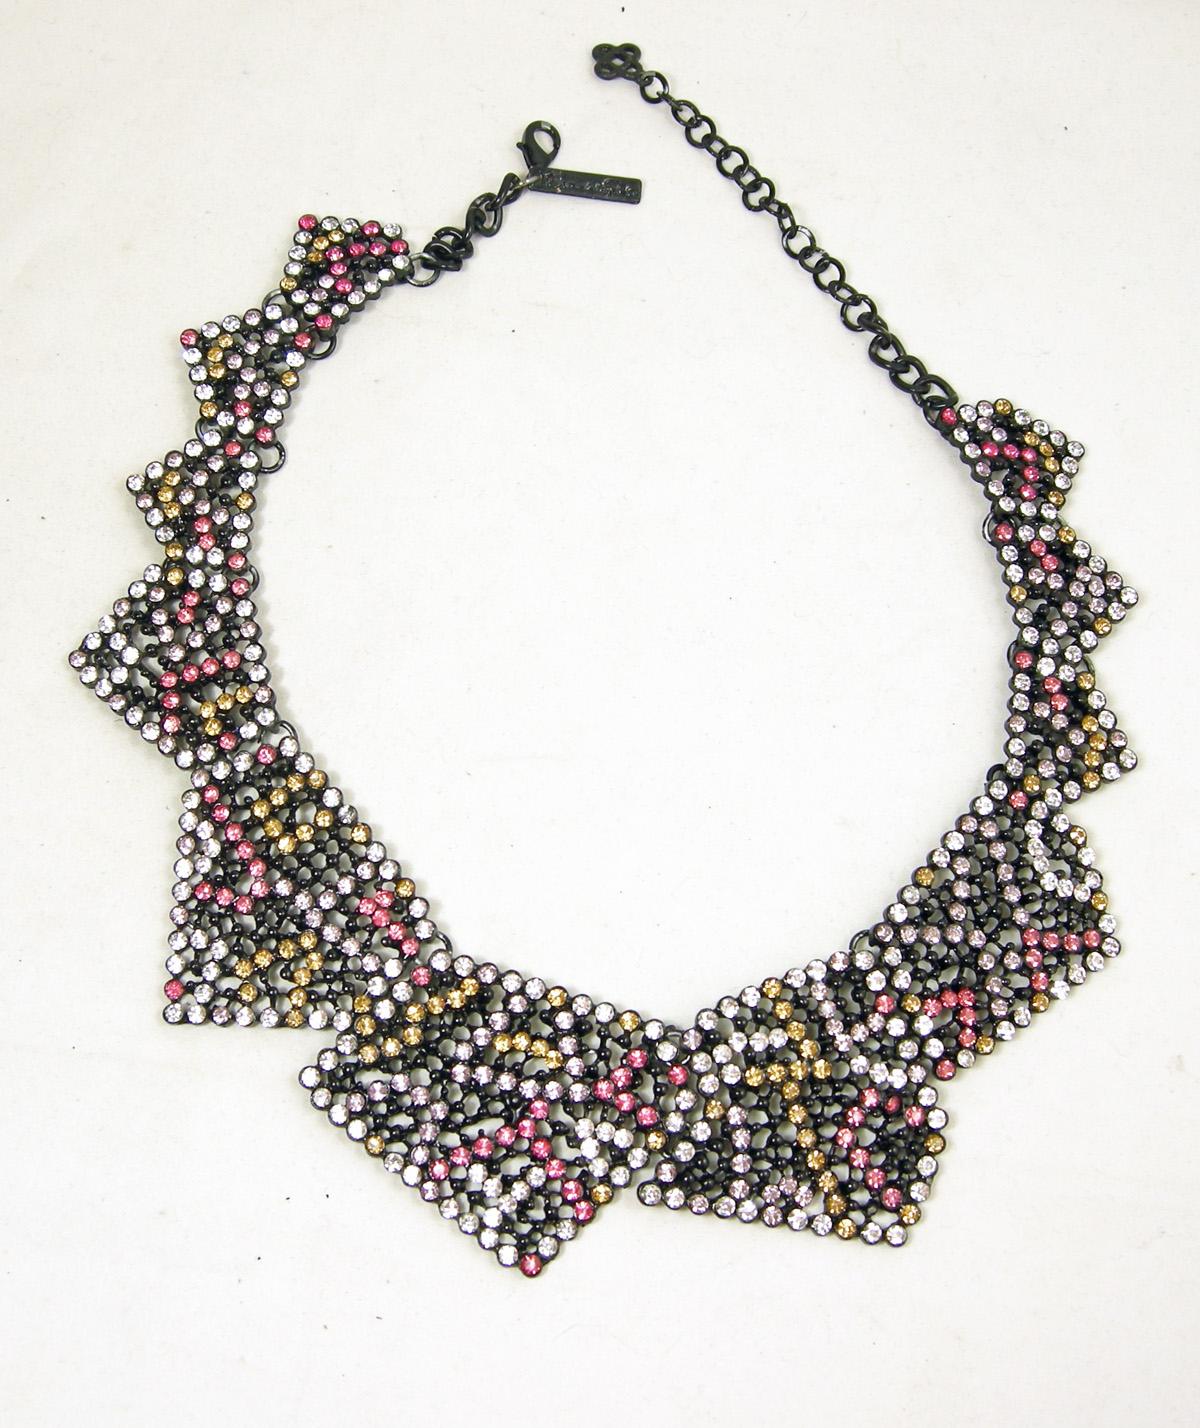 This gorgeous Oscar de la Renta necklace is from the 50s and was one of his runway necklaces.  It has a Japanned metal finish with a geometric design combining beautiful colorful rhinestones of yellow, pink, light purple and clear.  The geometric